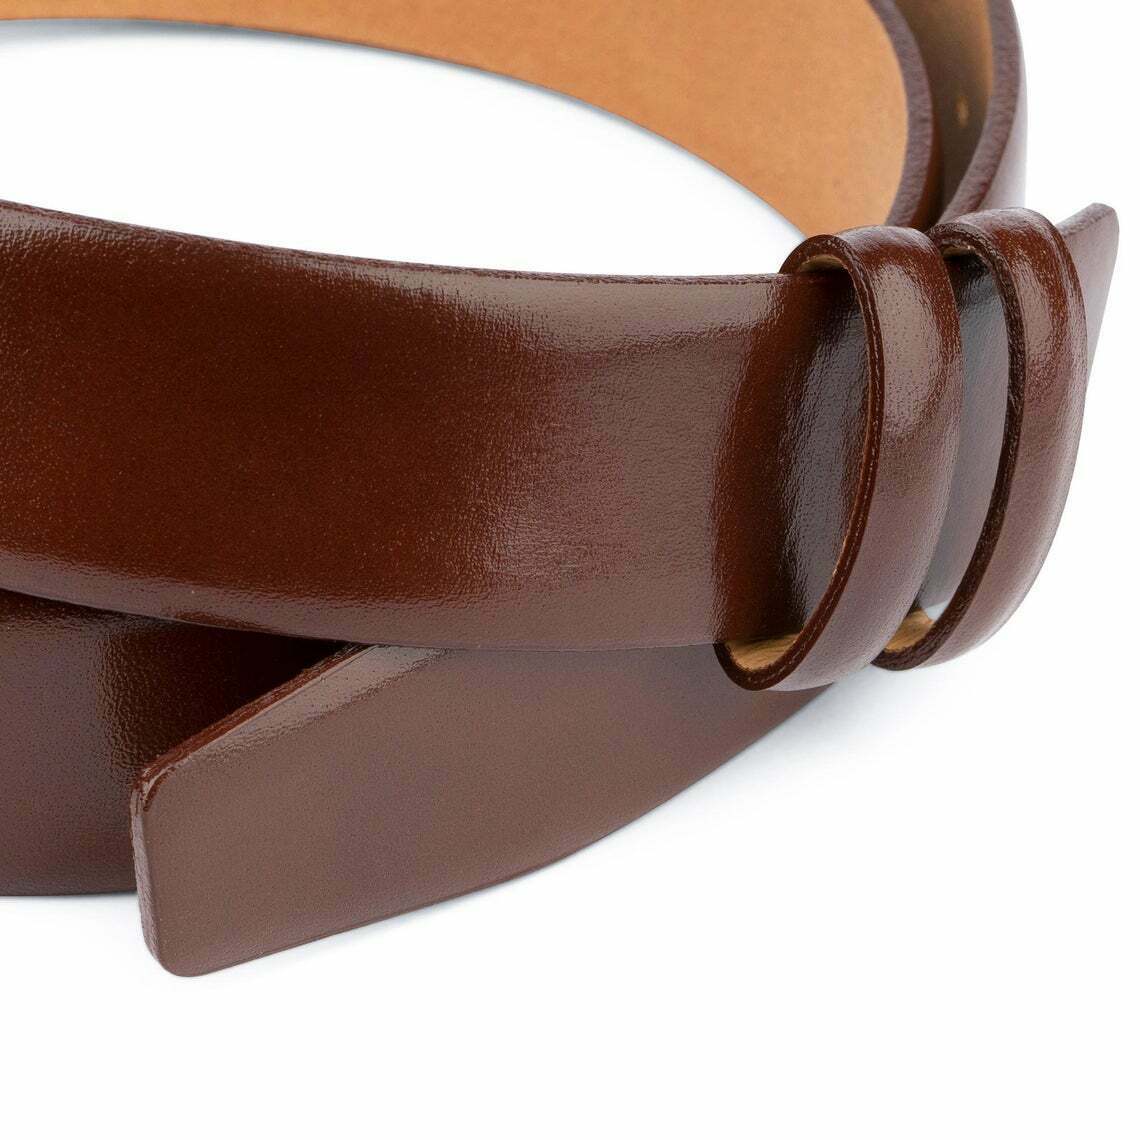 Cognac Leather Belt Replacement Strap For Montblanc Buckle Mens Brown Belts 35mm